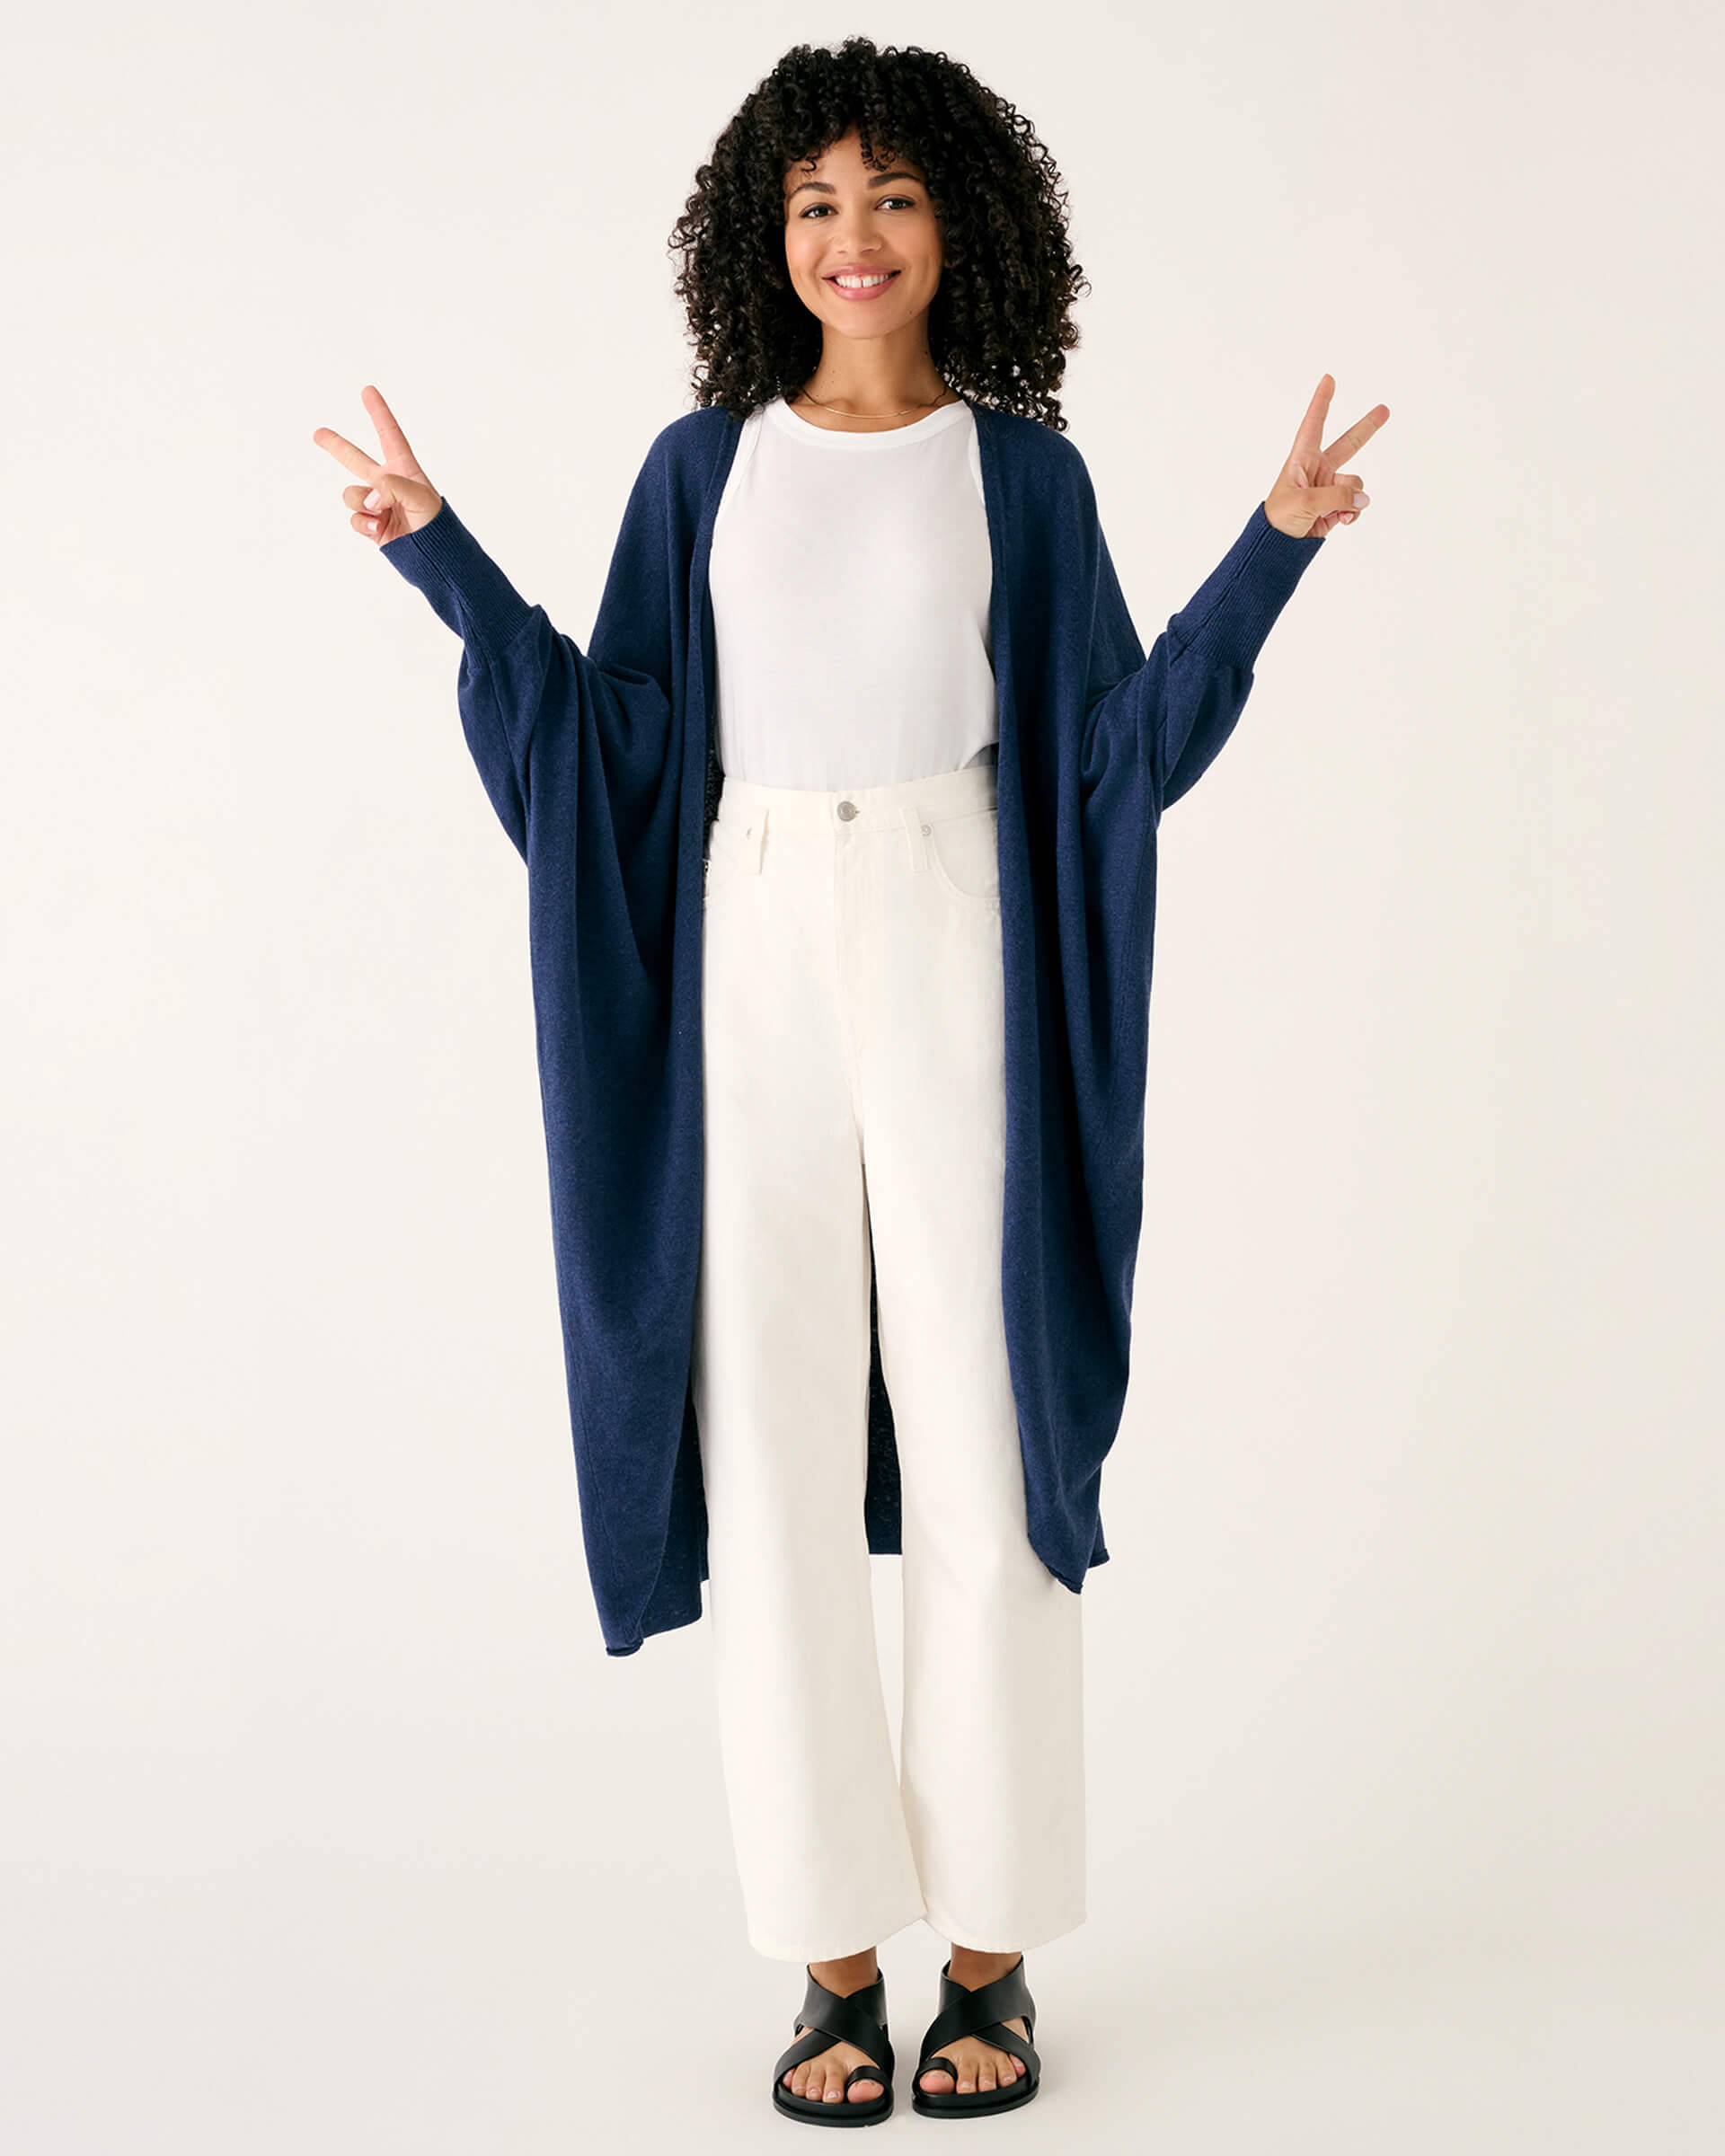 female wearing dark blue kimono sweater holding up peace signs on a white background